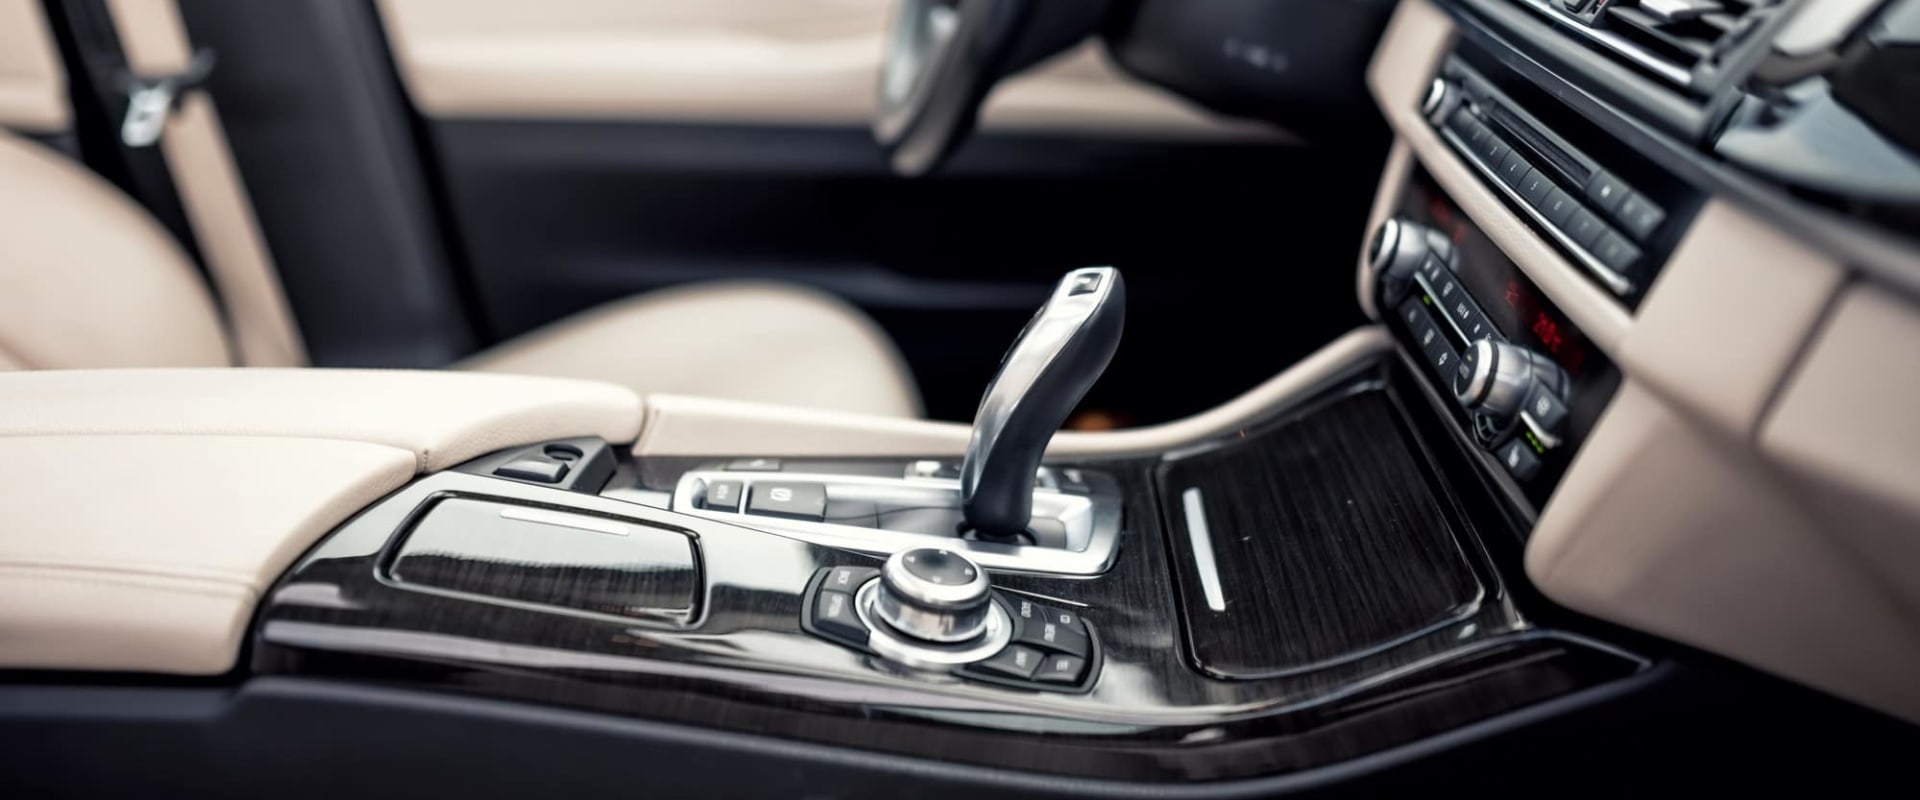 How often should you detail the interior of your car?